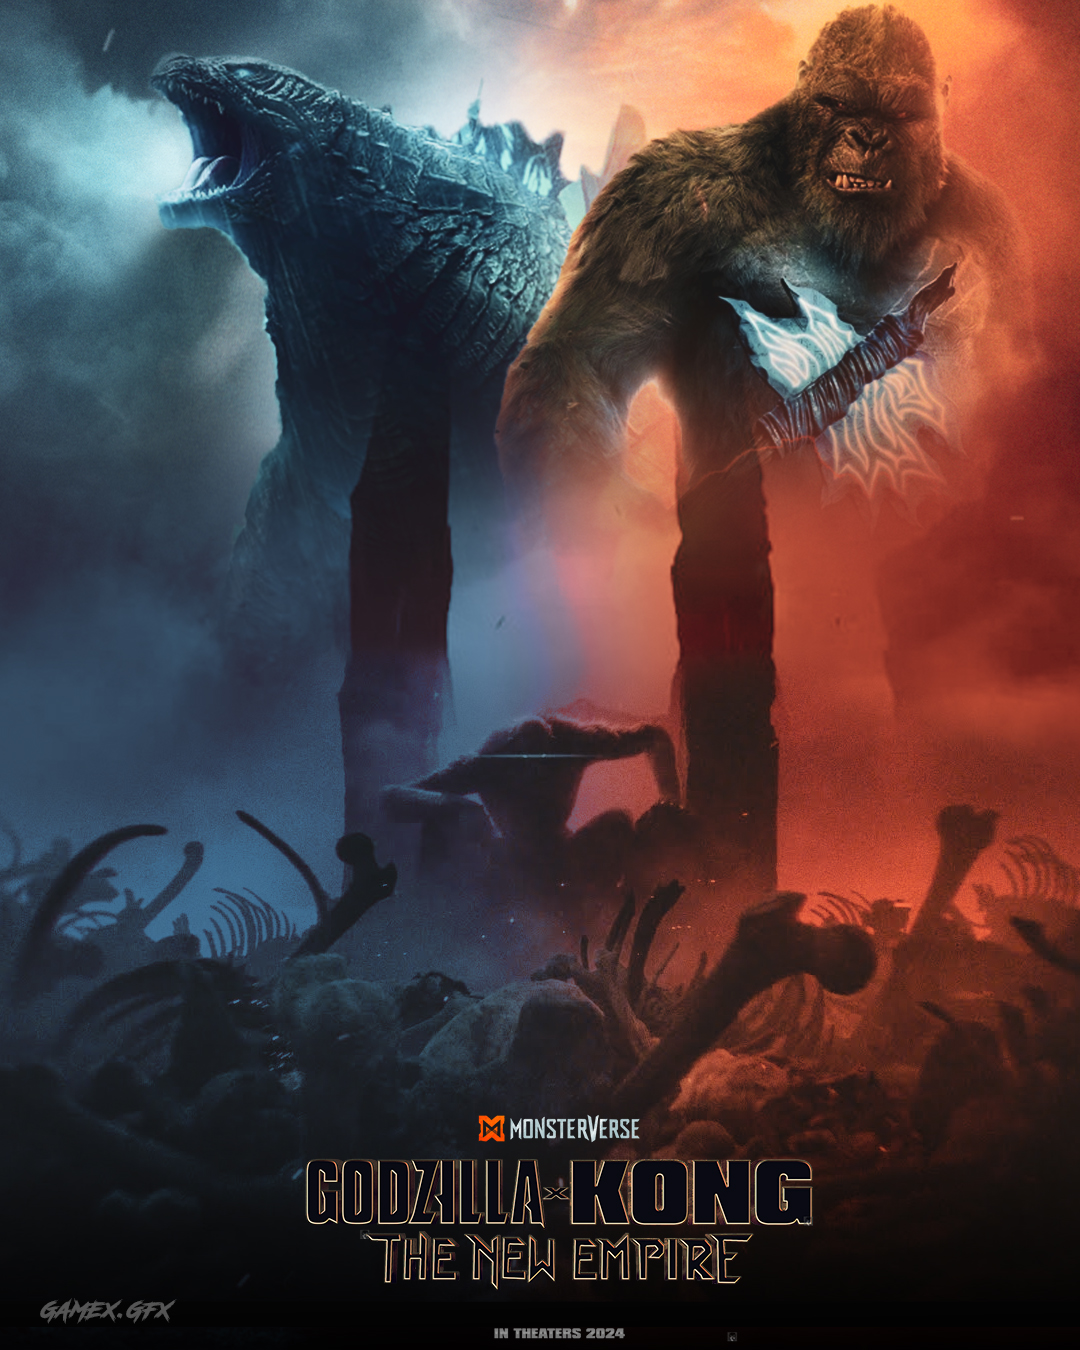 Godzilla x Kong movie wallpaper Resolution 1080x1350 | Best Download this awesome wallpaper - Cool Wallpaper HD - CoolWallpaper-HD.com